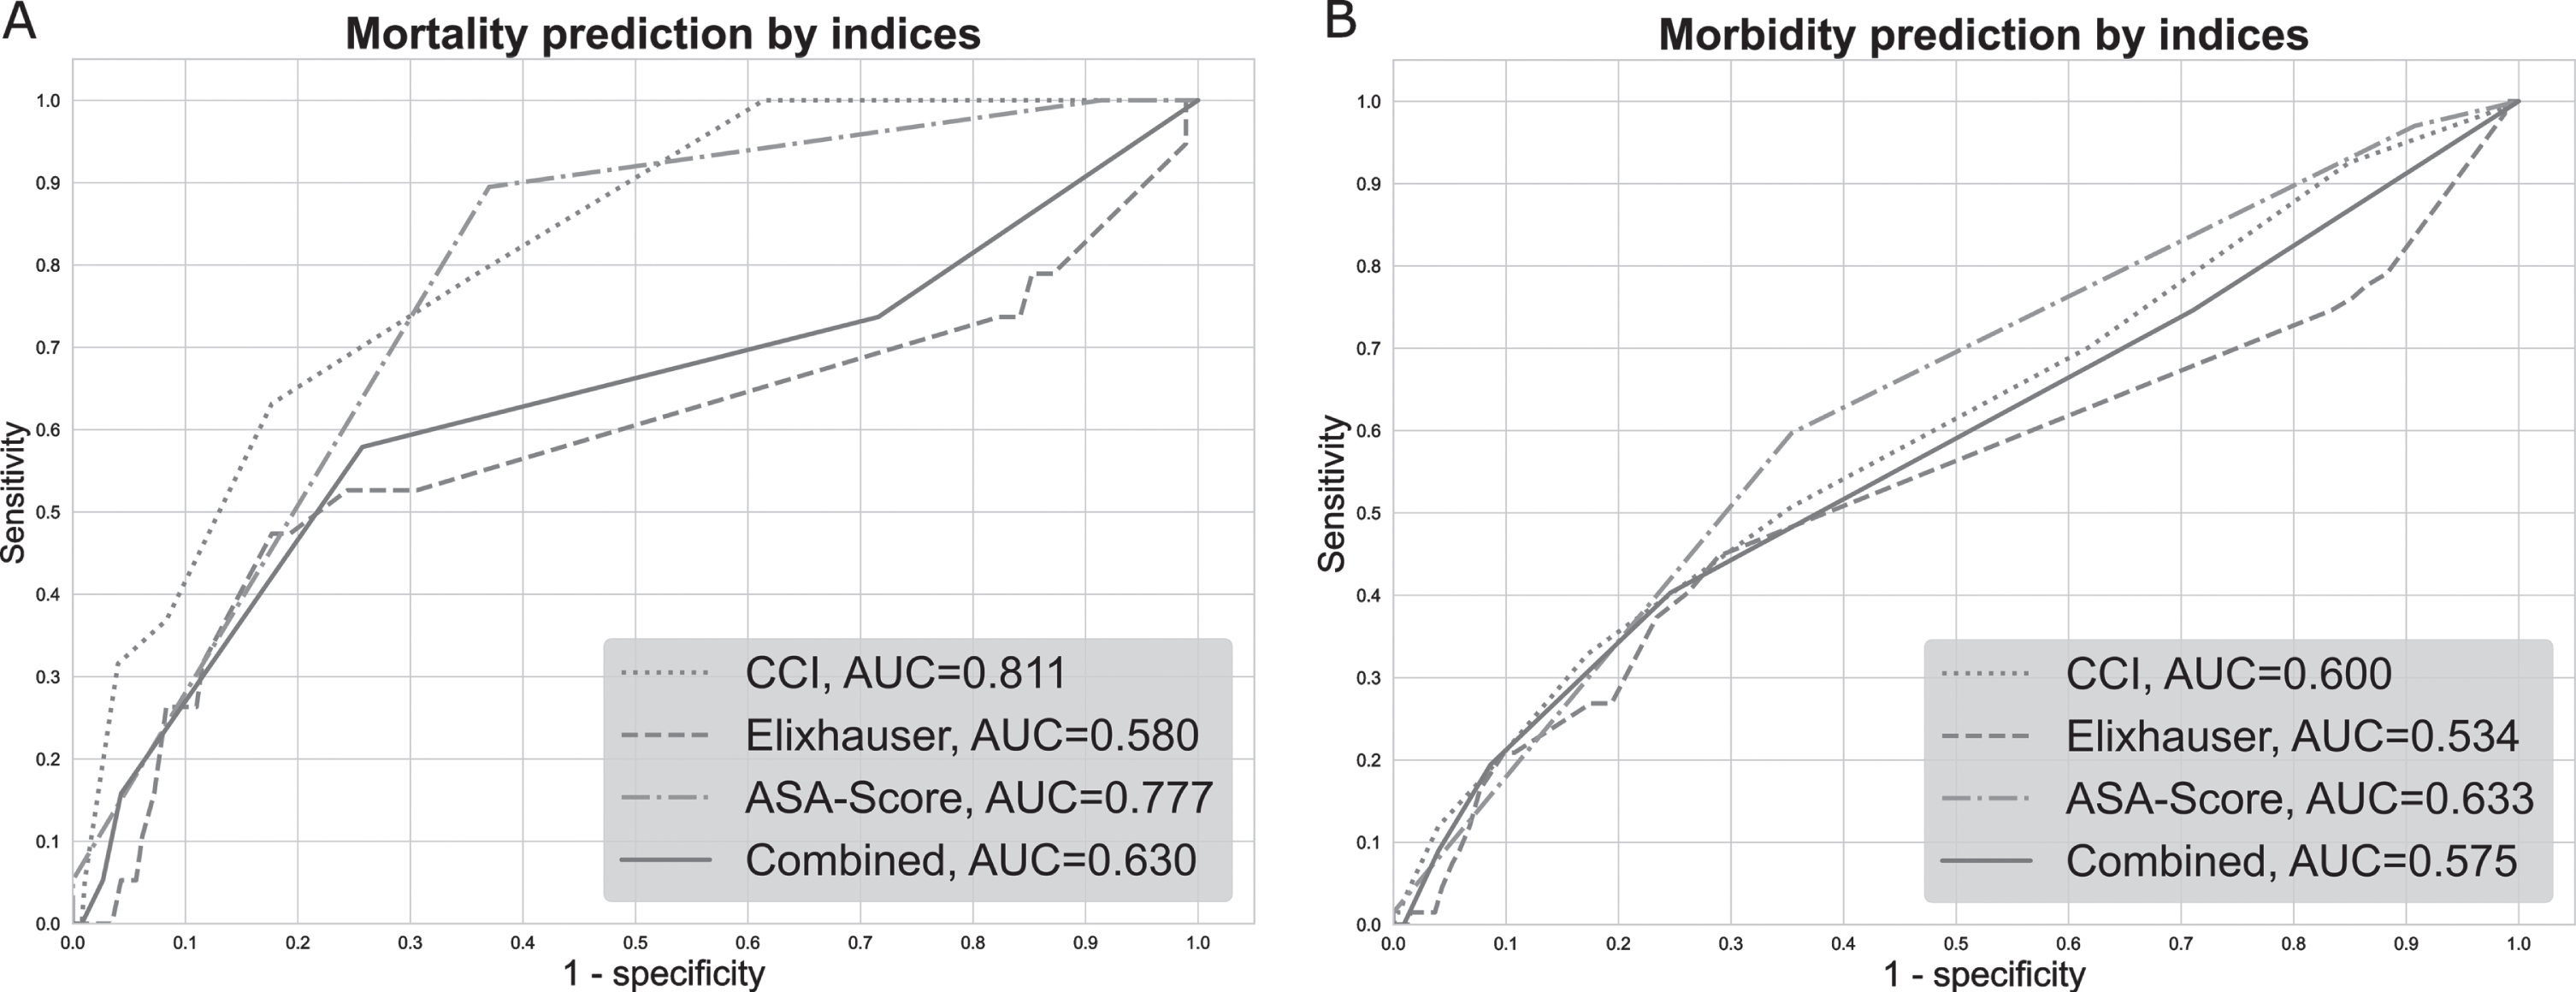 ROC curves for the index prediction of 90-day mortality and severe 30-day complications. The figure shows the individual ROC curves and corresponding AUROCs of the four comorbidity indices for the respective predictions. A) Prediction of 90-day mortality by the four comorbidity indices in univariable logistic regression analysis. B) Prediction of severe 30-day complications (CDC IIIb-V) by the four comorbidity indices in univariable logistic regression analysis.